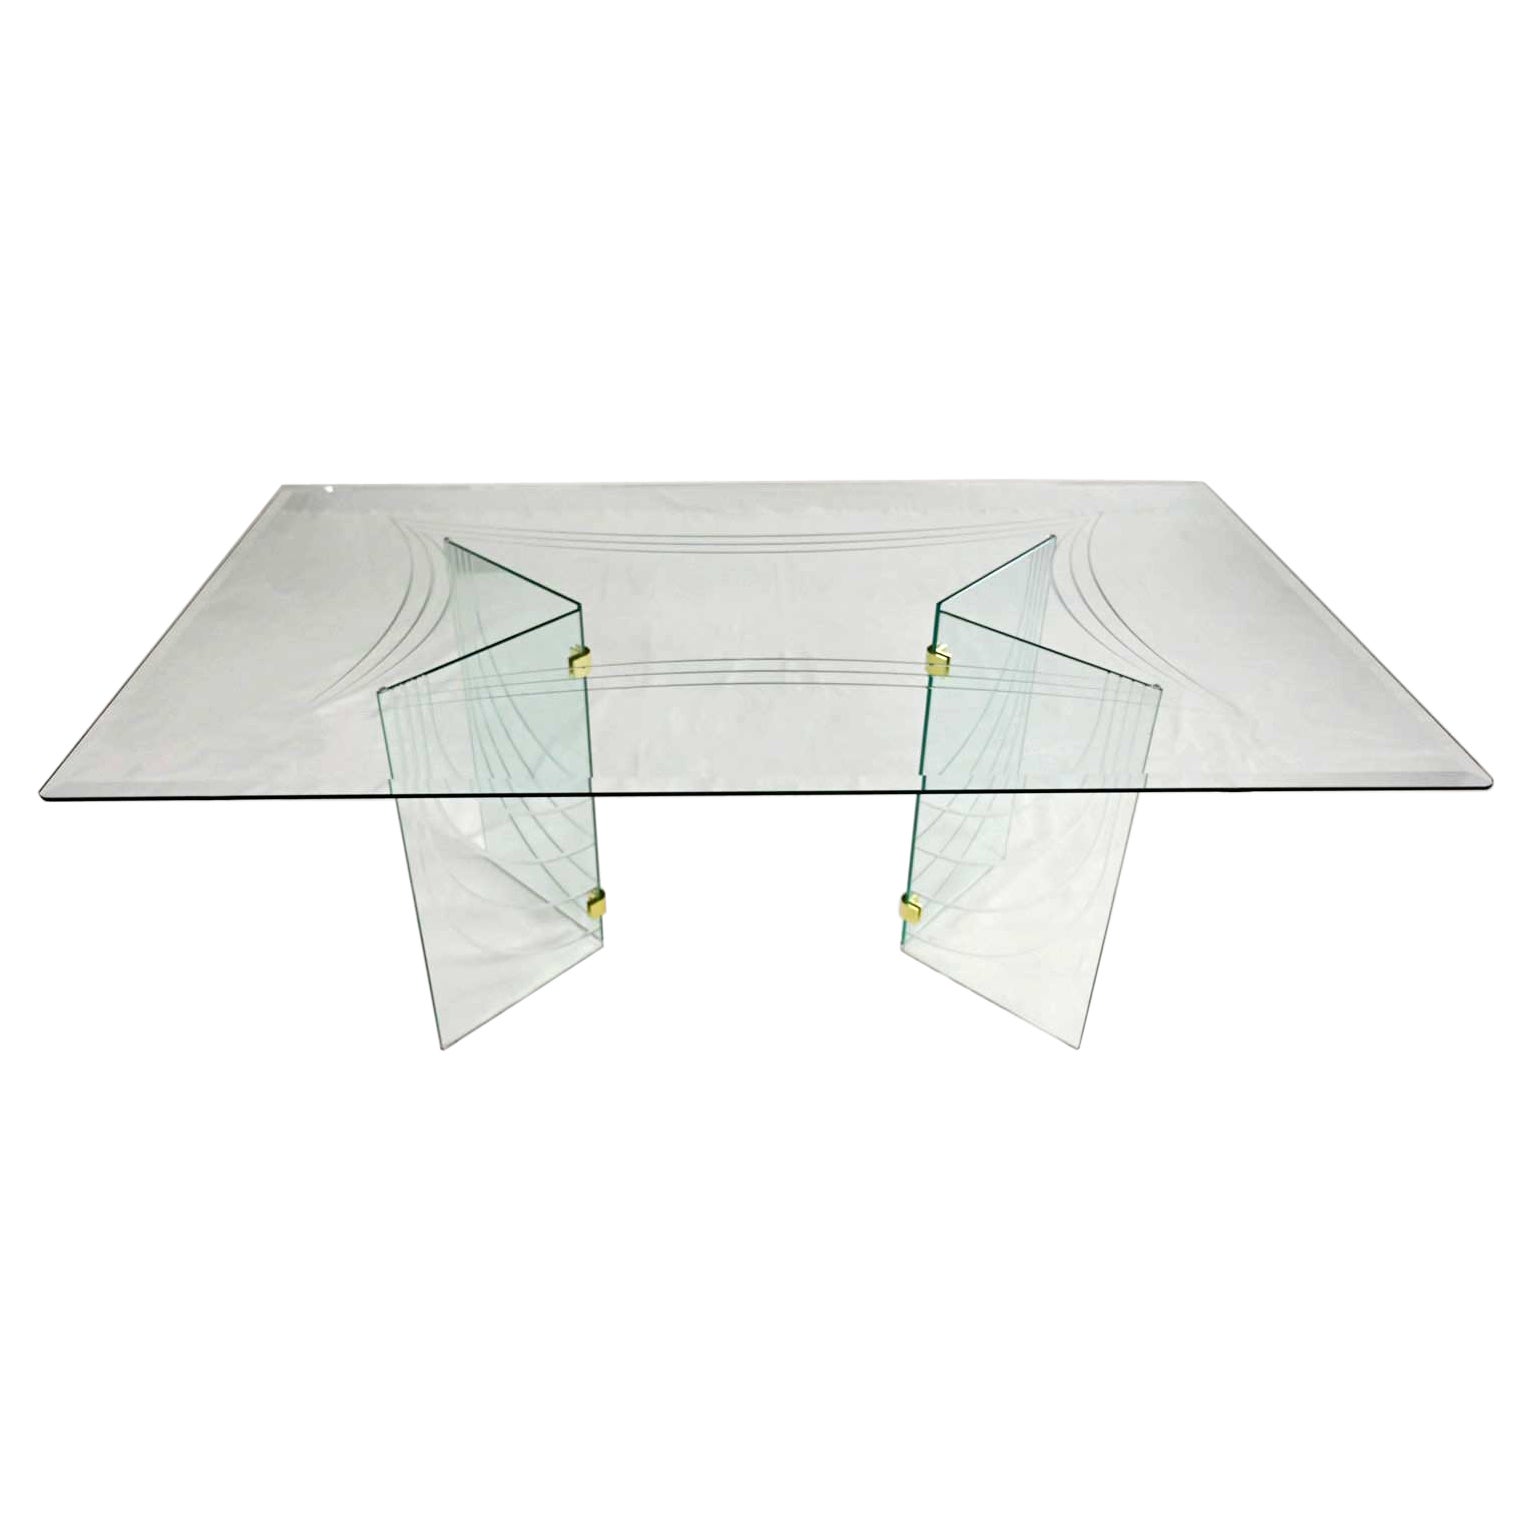 Modern All Glass Dining Table V Double Pedestal Base Style The Pace Collection